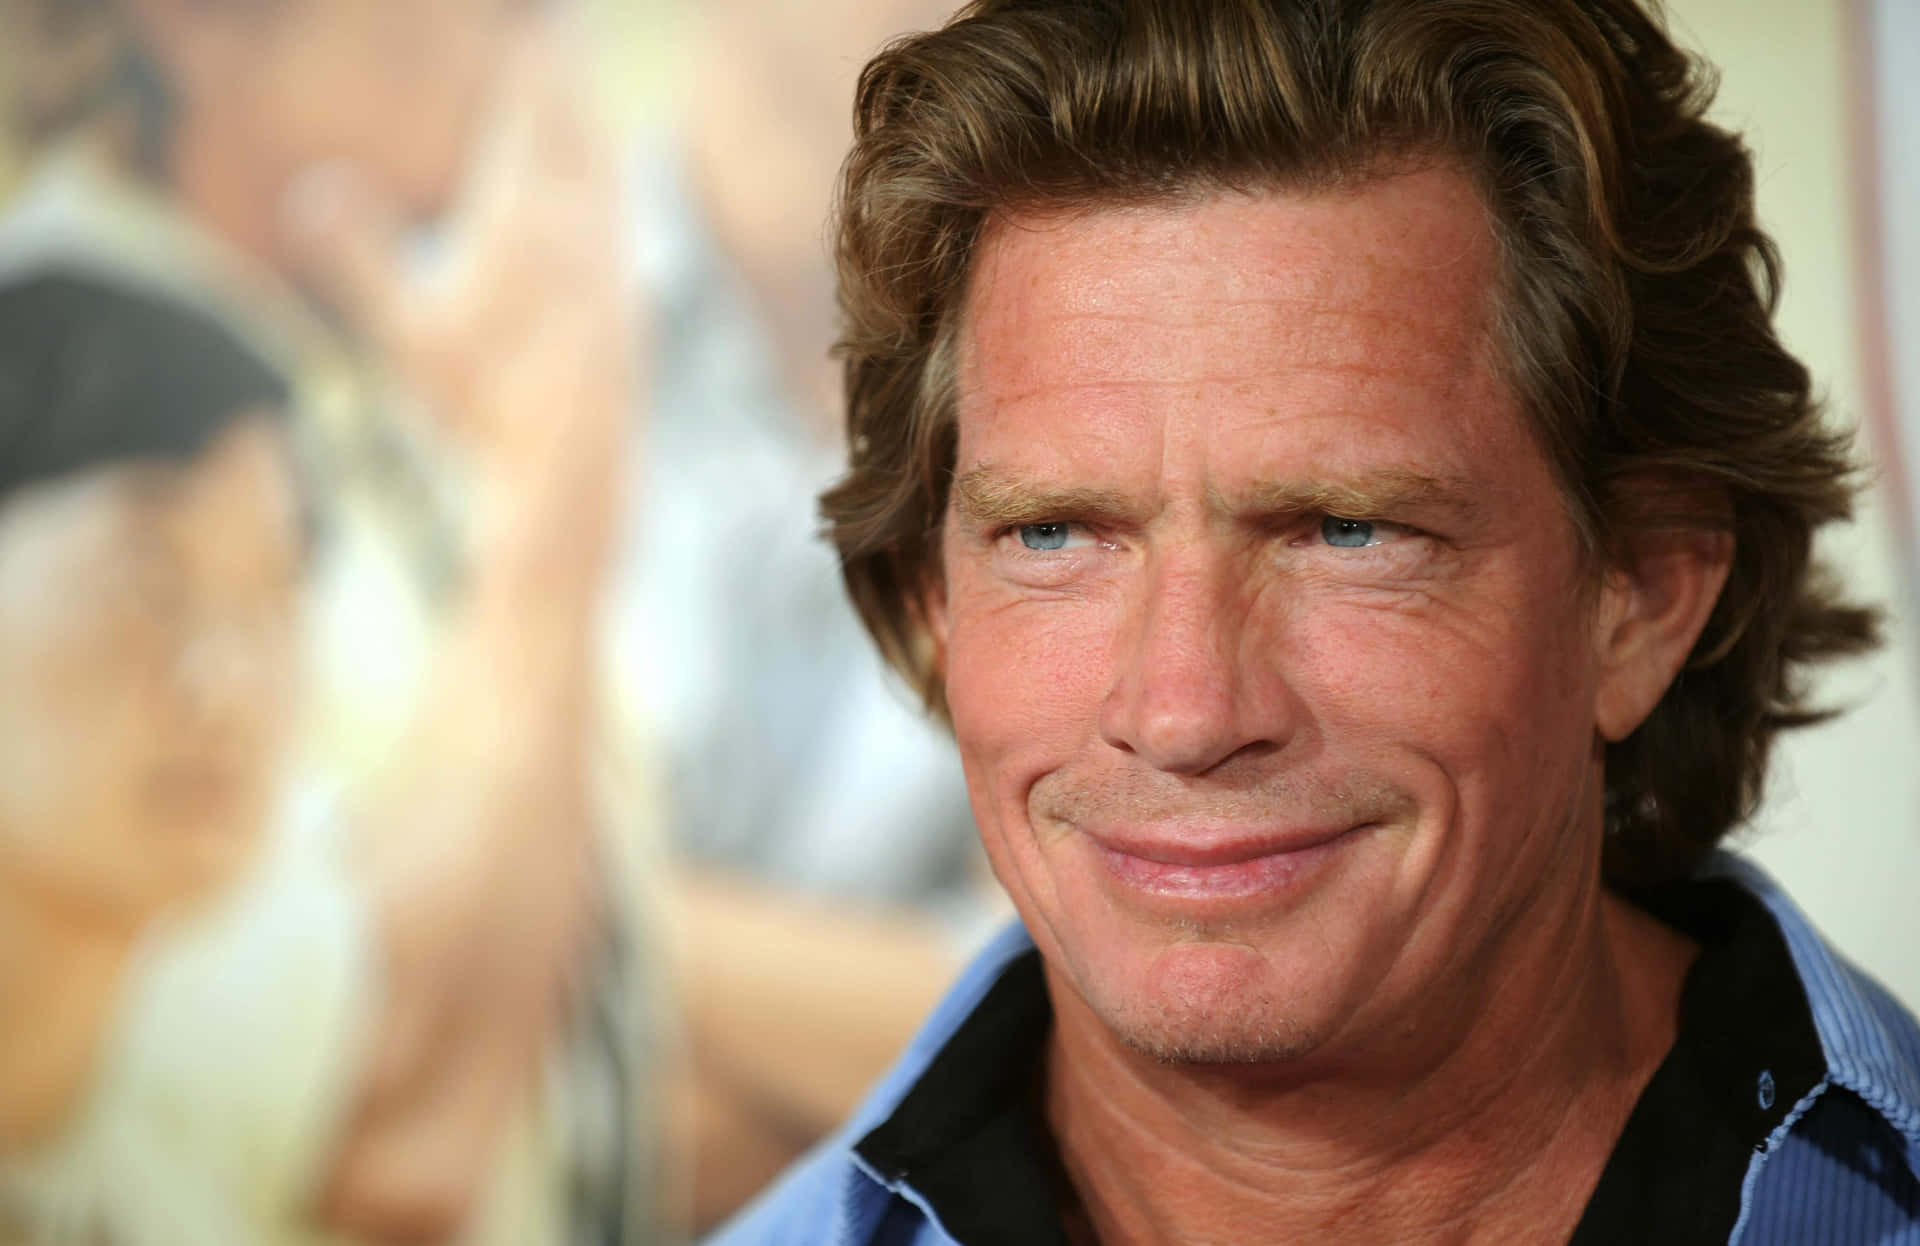 Actorthomas Haden Church Would Be Translated To 